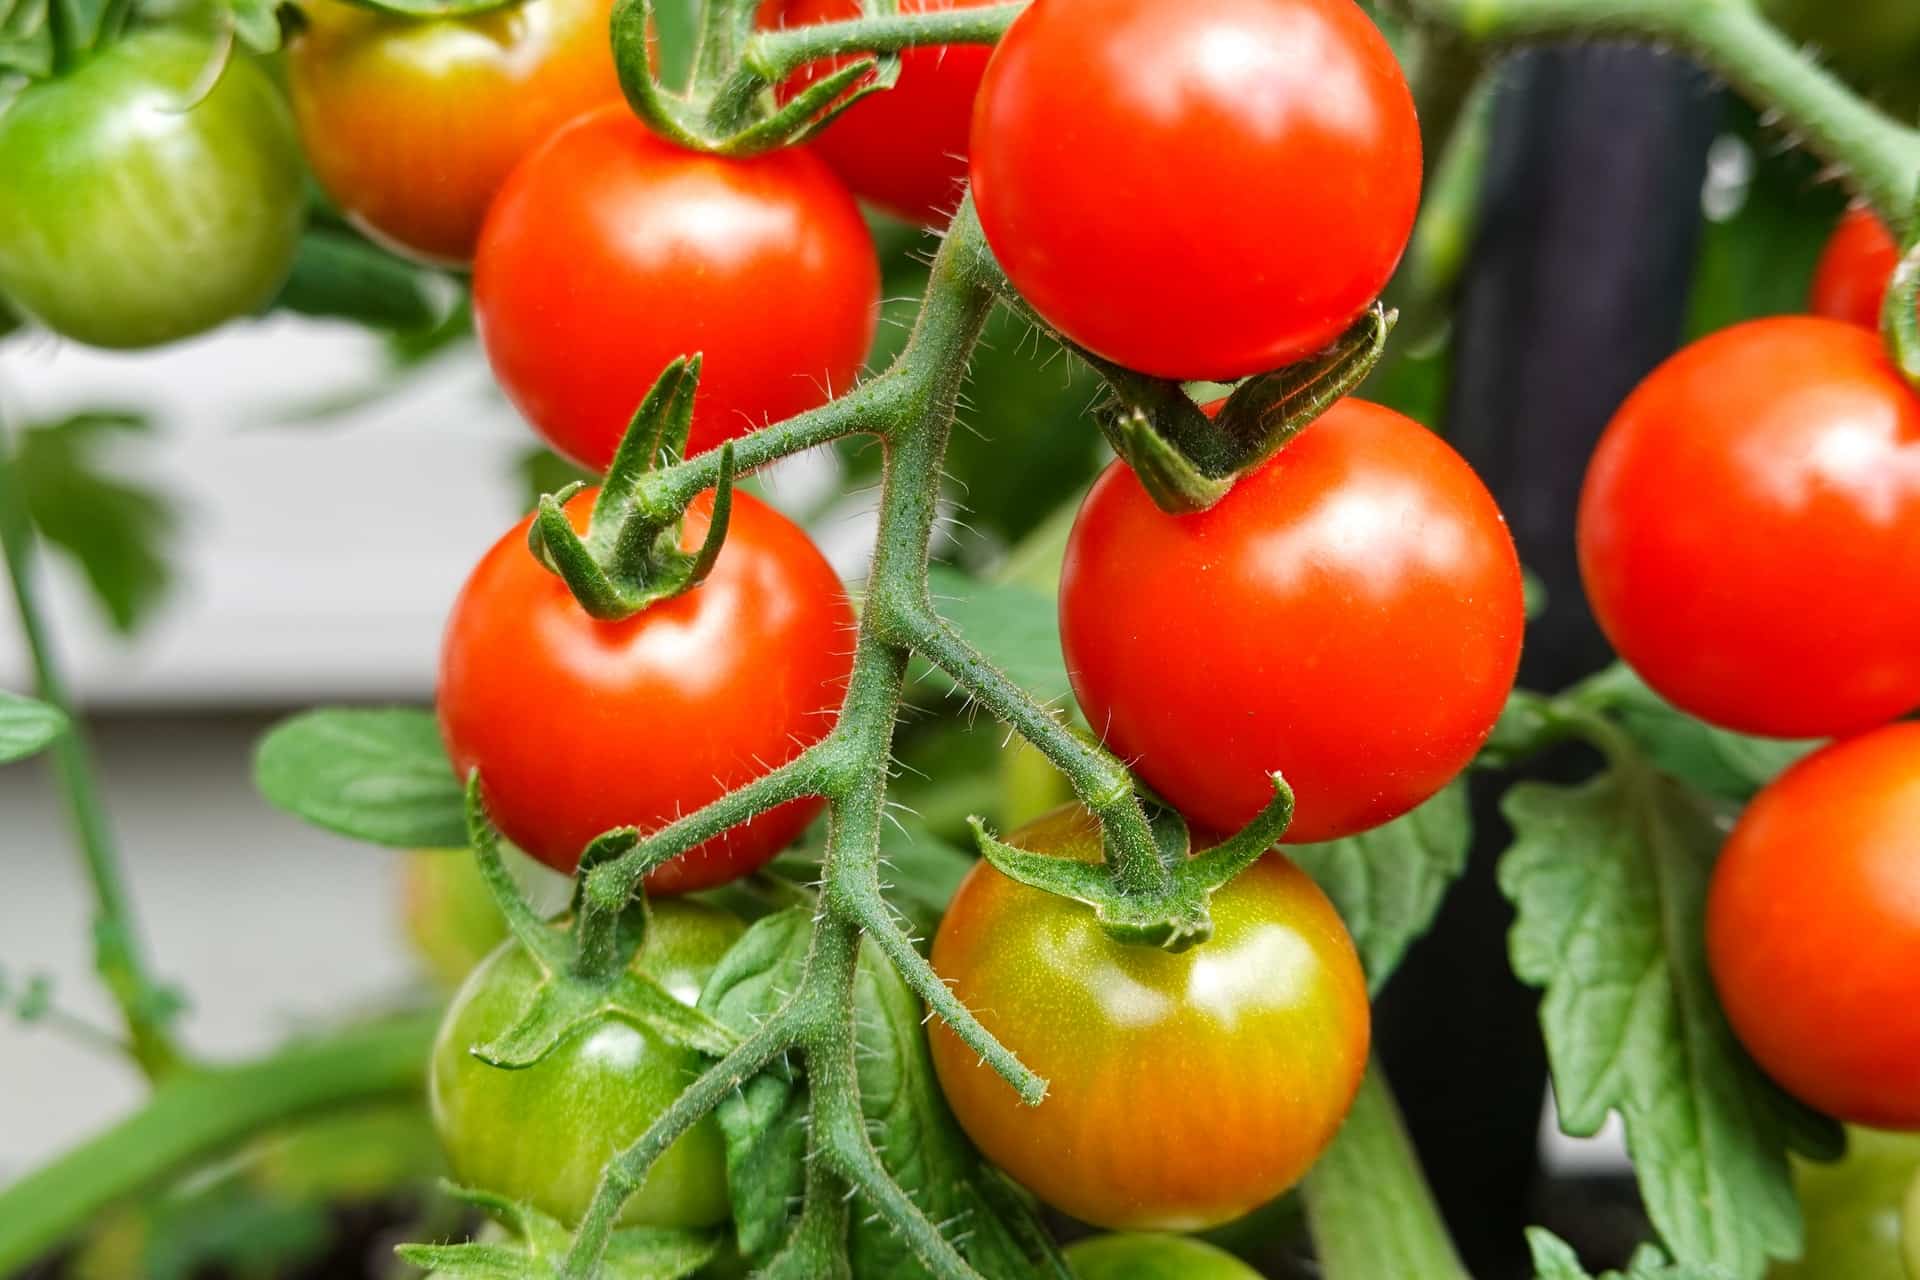 grow tomatoes at home healthy tomato plant with fresh looking tomatoes